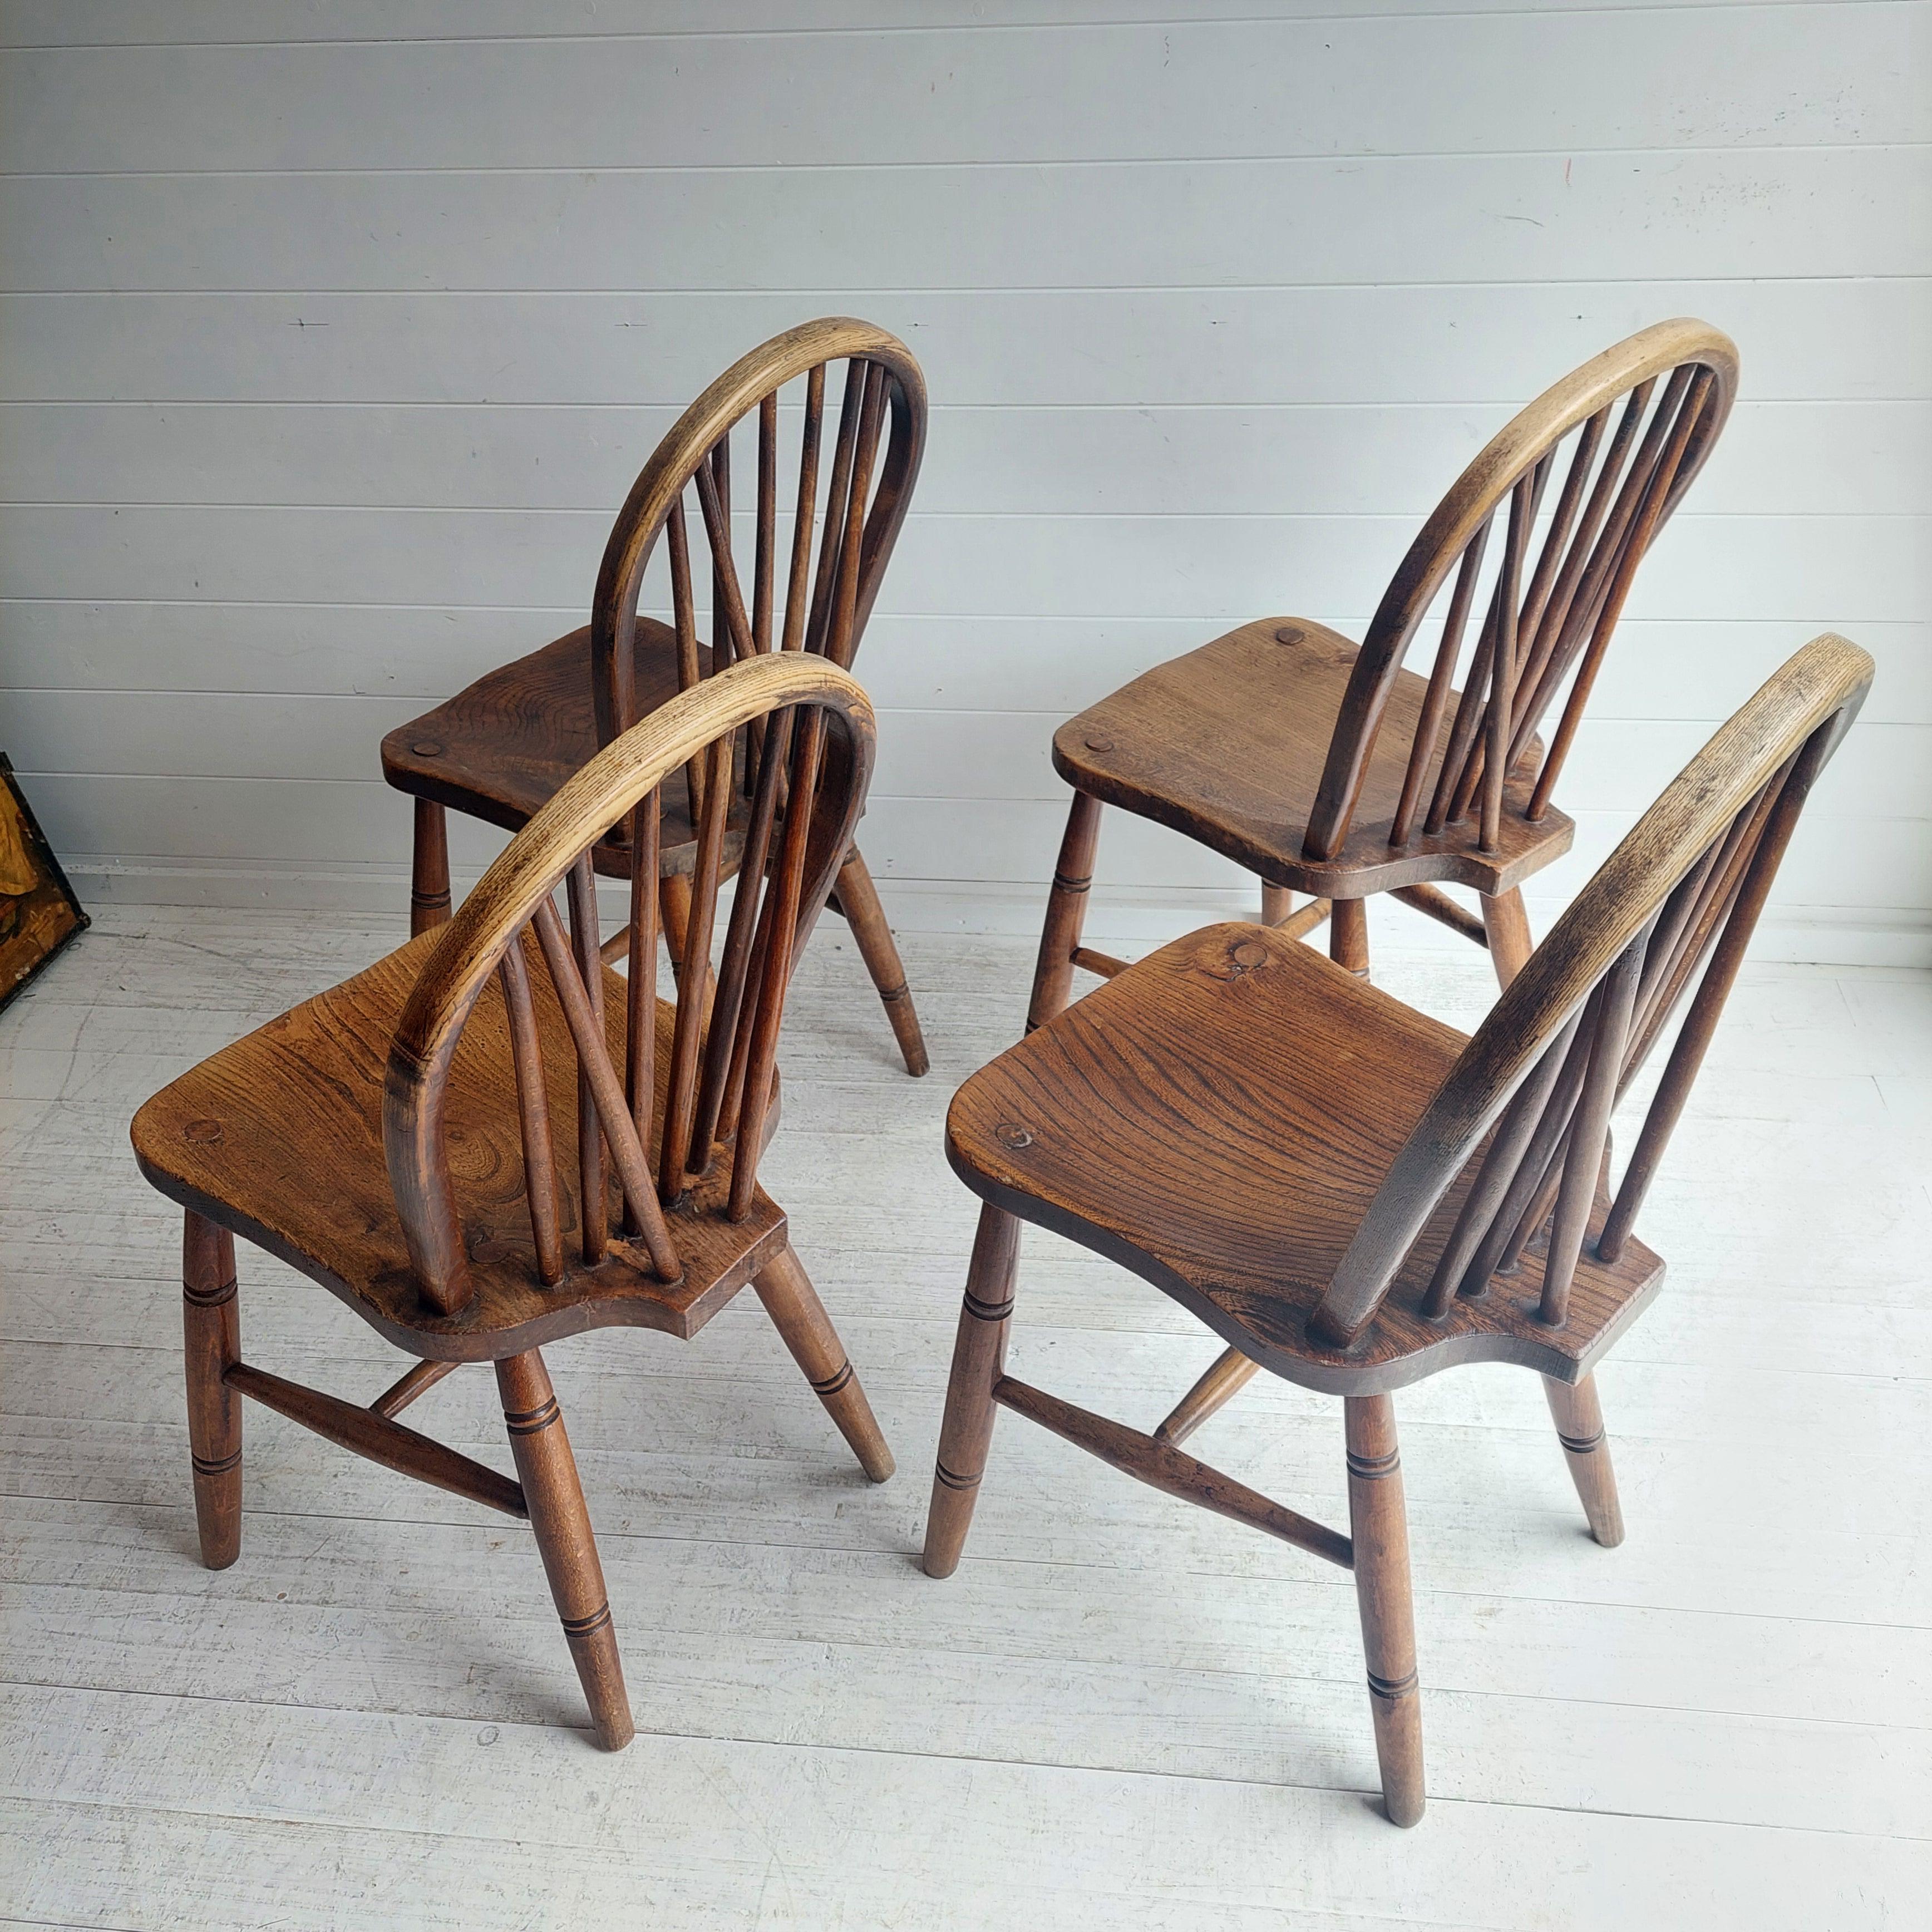 Vintage 4 High Wycombe Elm spindle hoop Back Windsor dining Chairs, 1942 For Sale 2